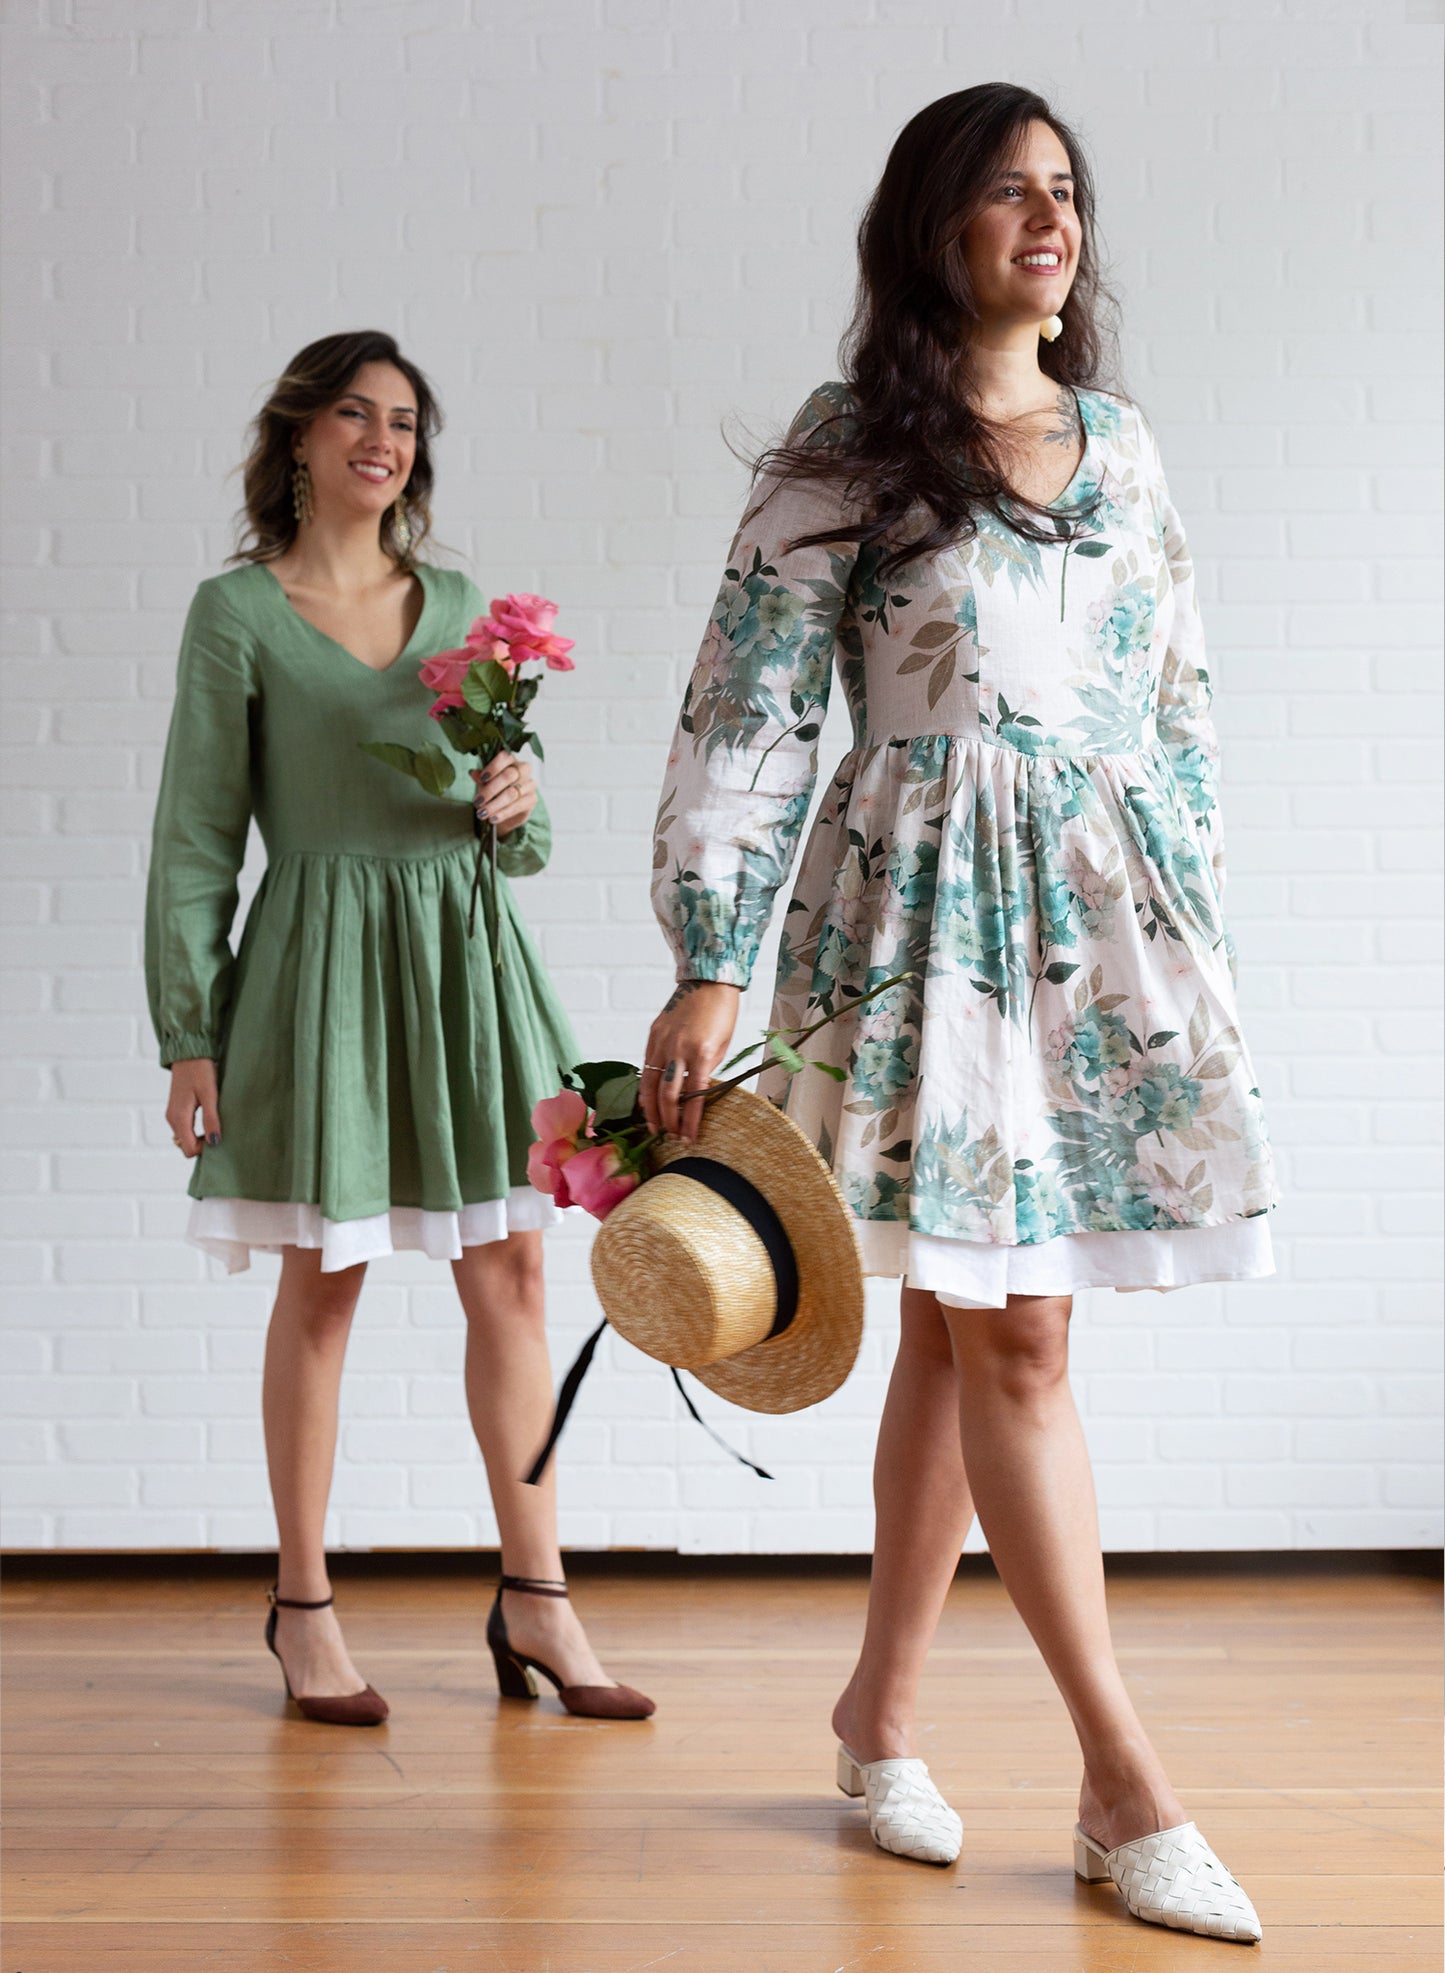 Two women wearing a green linen dress and a floral print linen dress holding flowers and a straw hat.